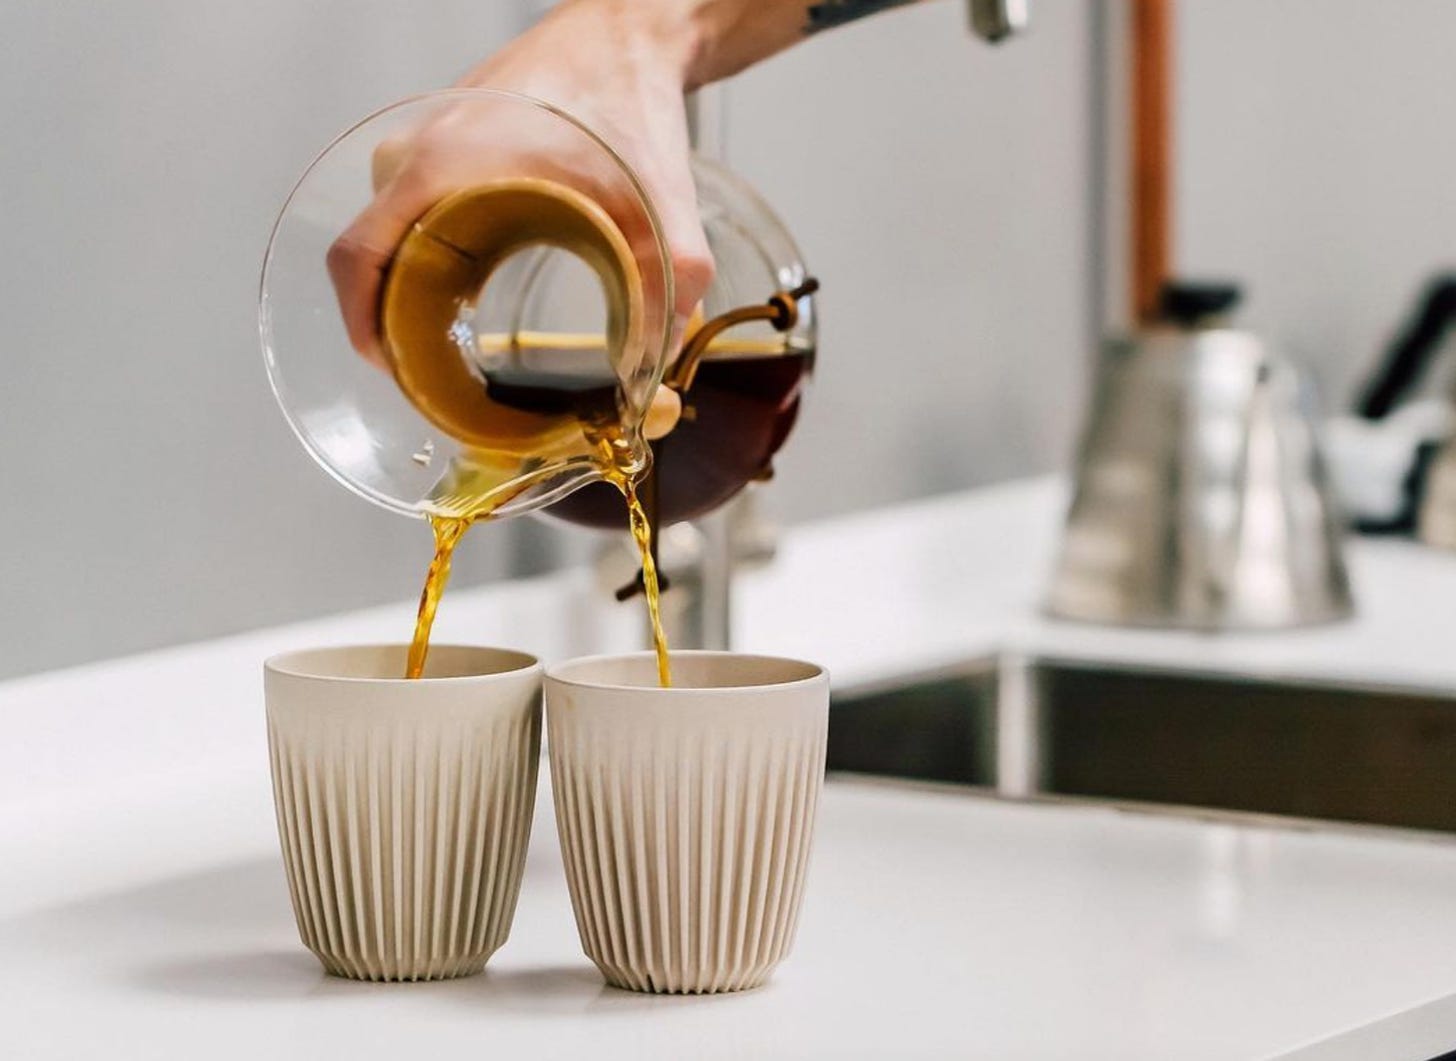 A close up on a hand pouring coffee from a full Chemex brewer pot into two beige cups simultaneously by angling the spout.